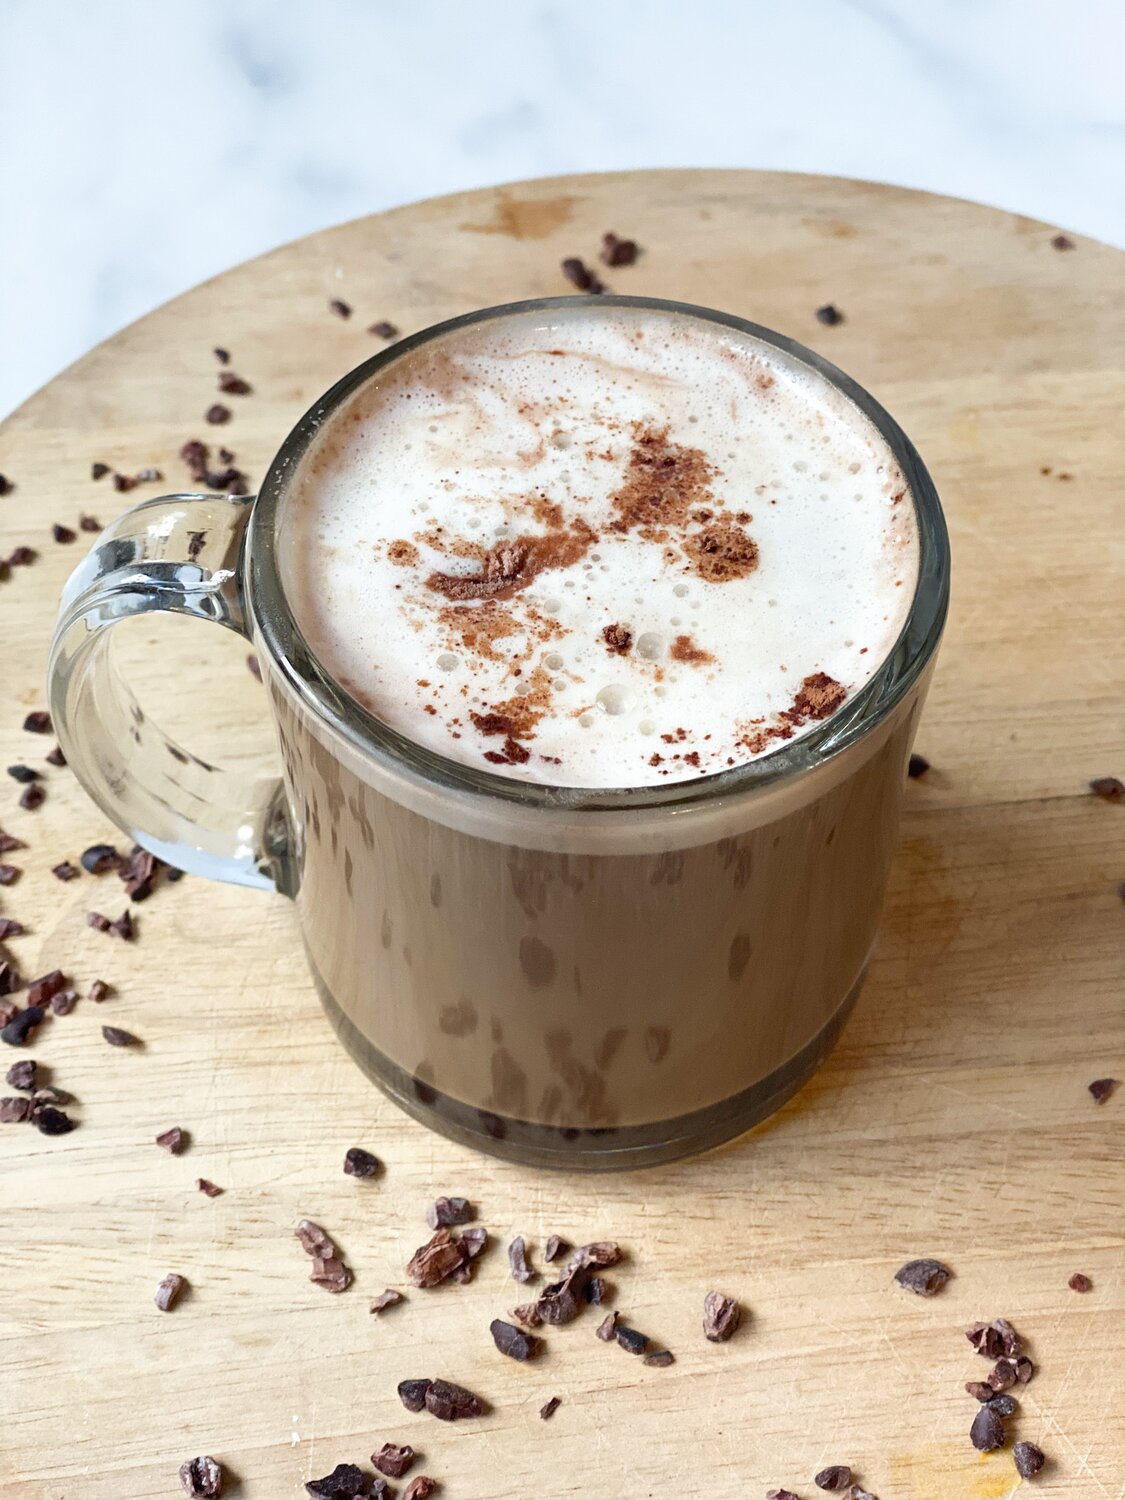 A close up view of the Mocha MCT Latte in a clear glass mug on a wooden board surrounded by coffee beans.